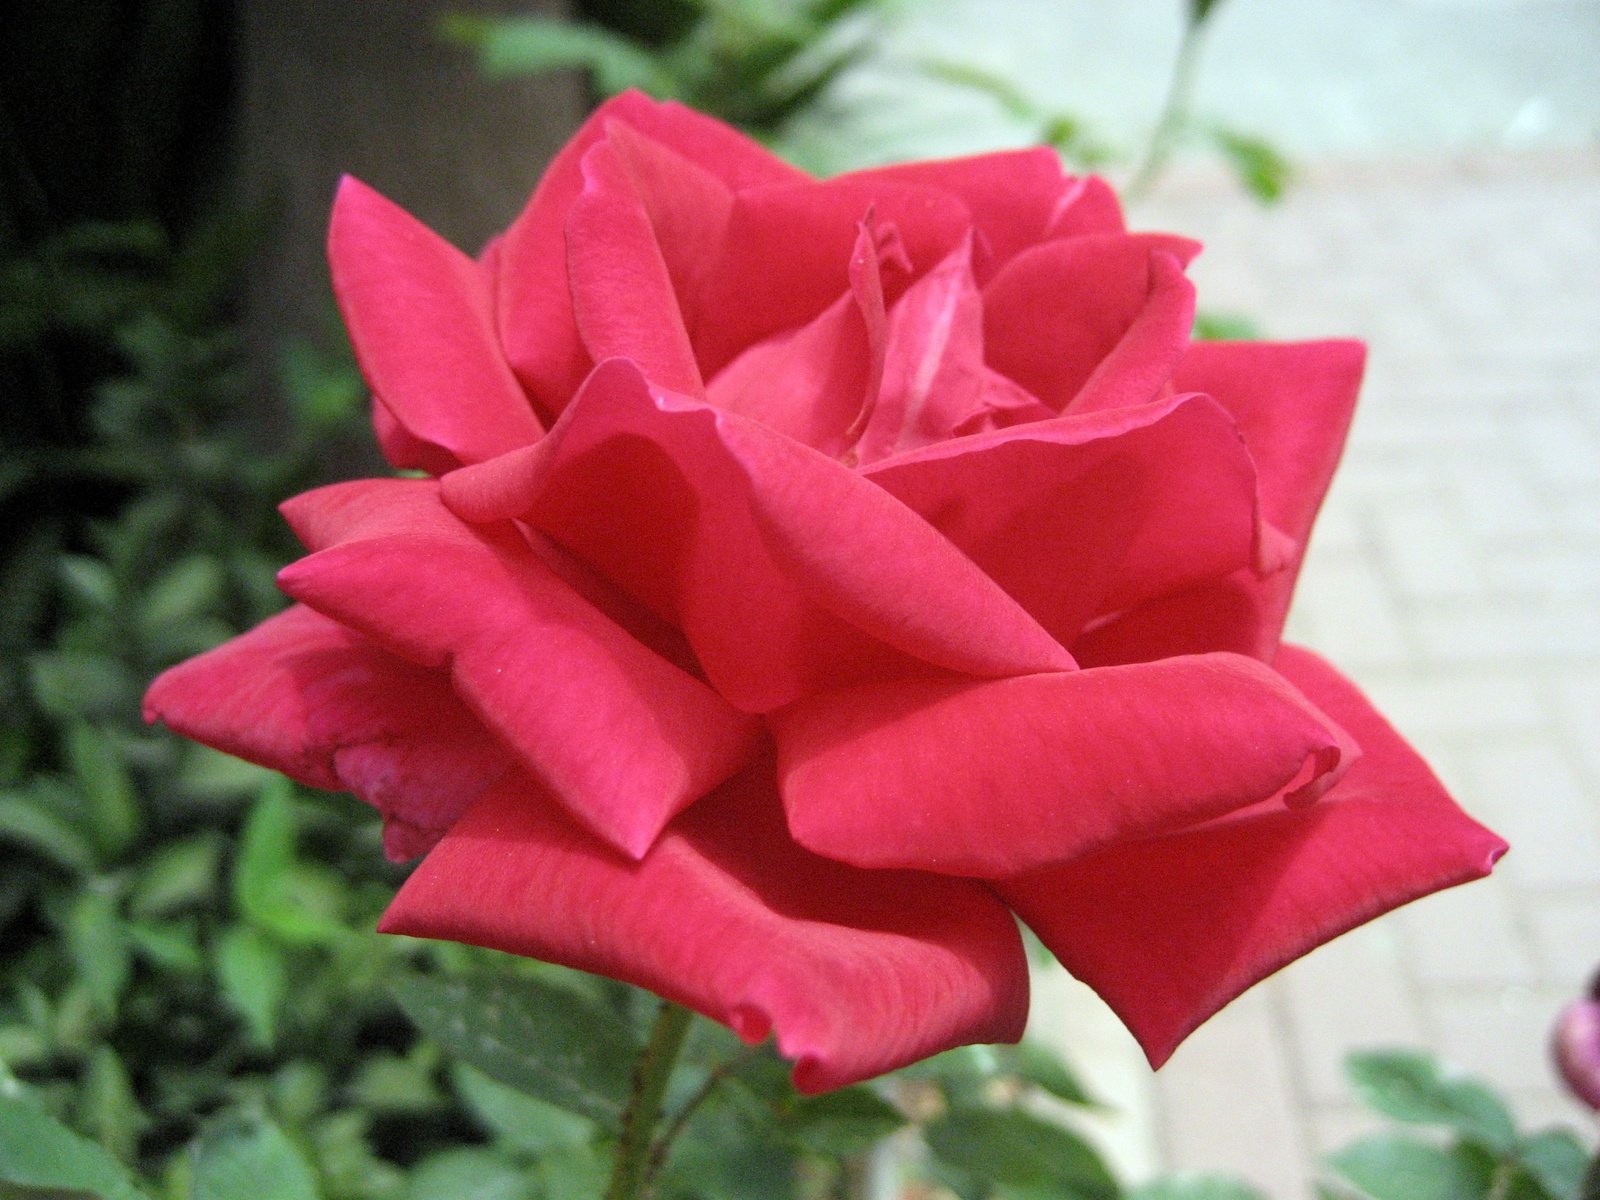 a red rose blooming in the midst of some leaves